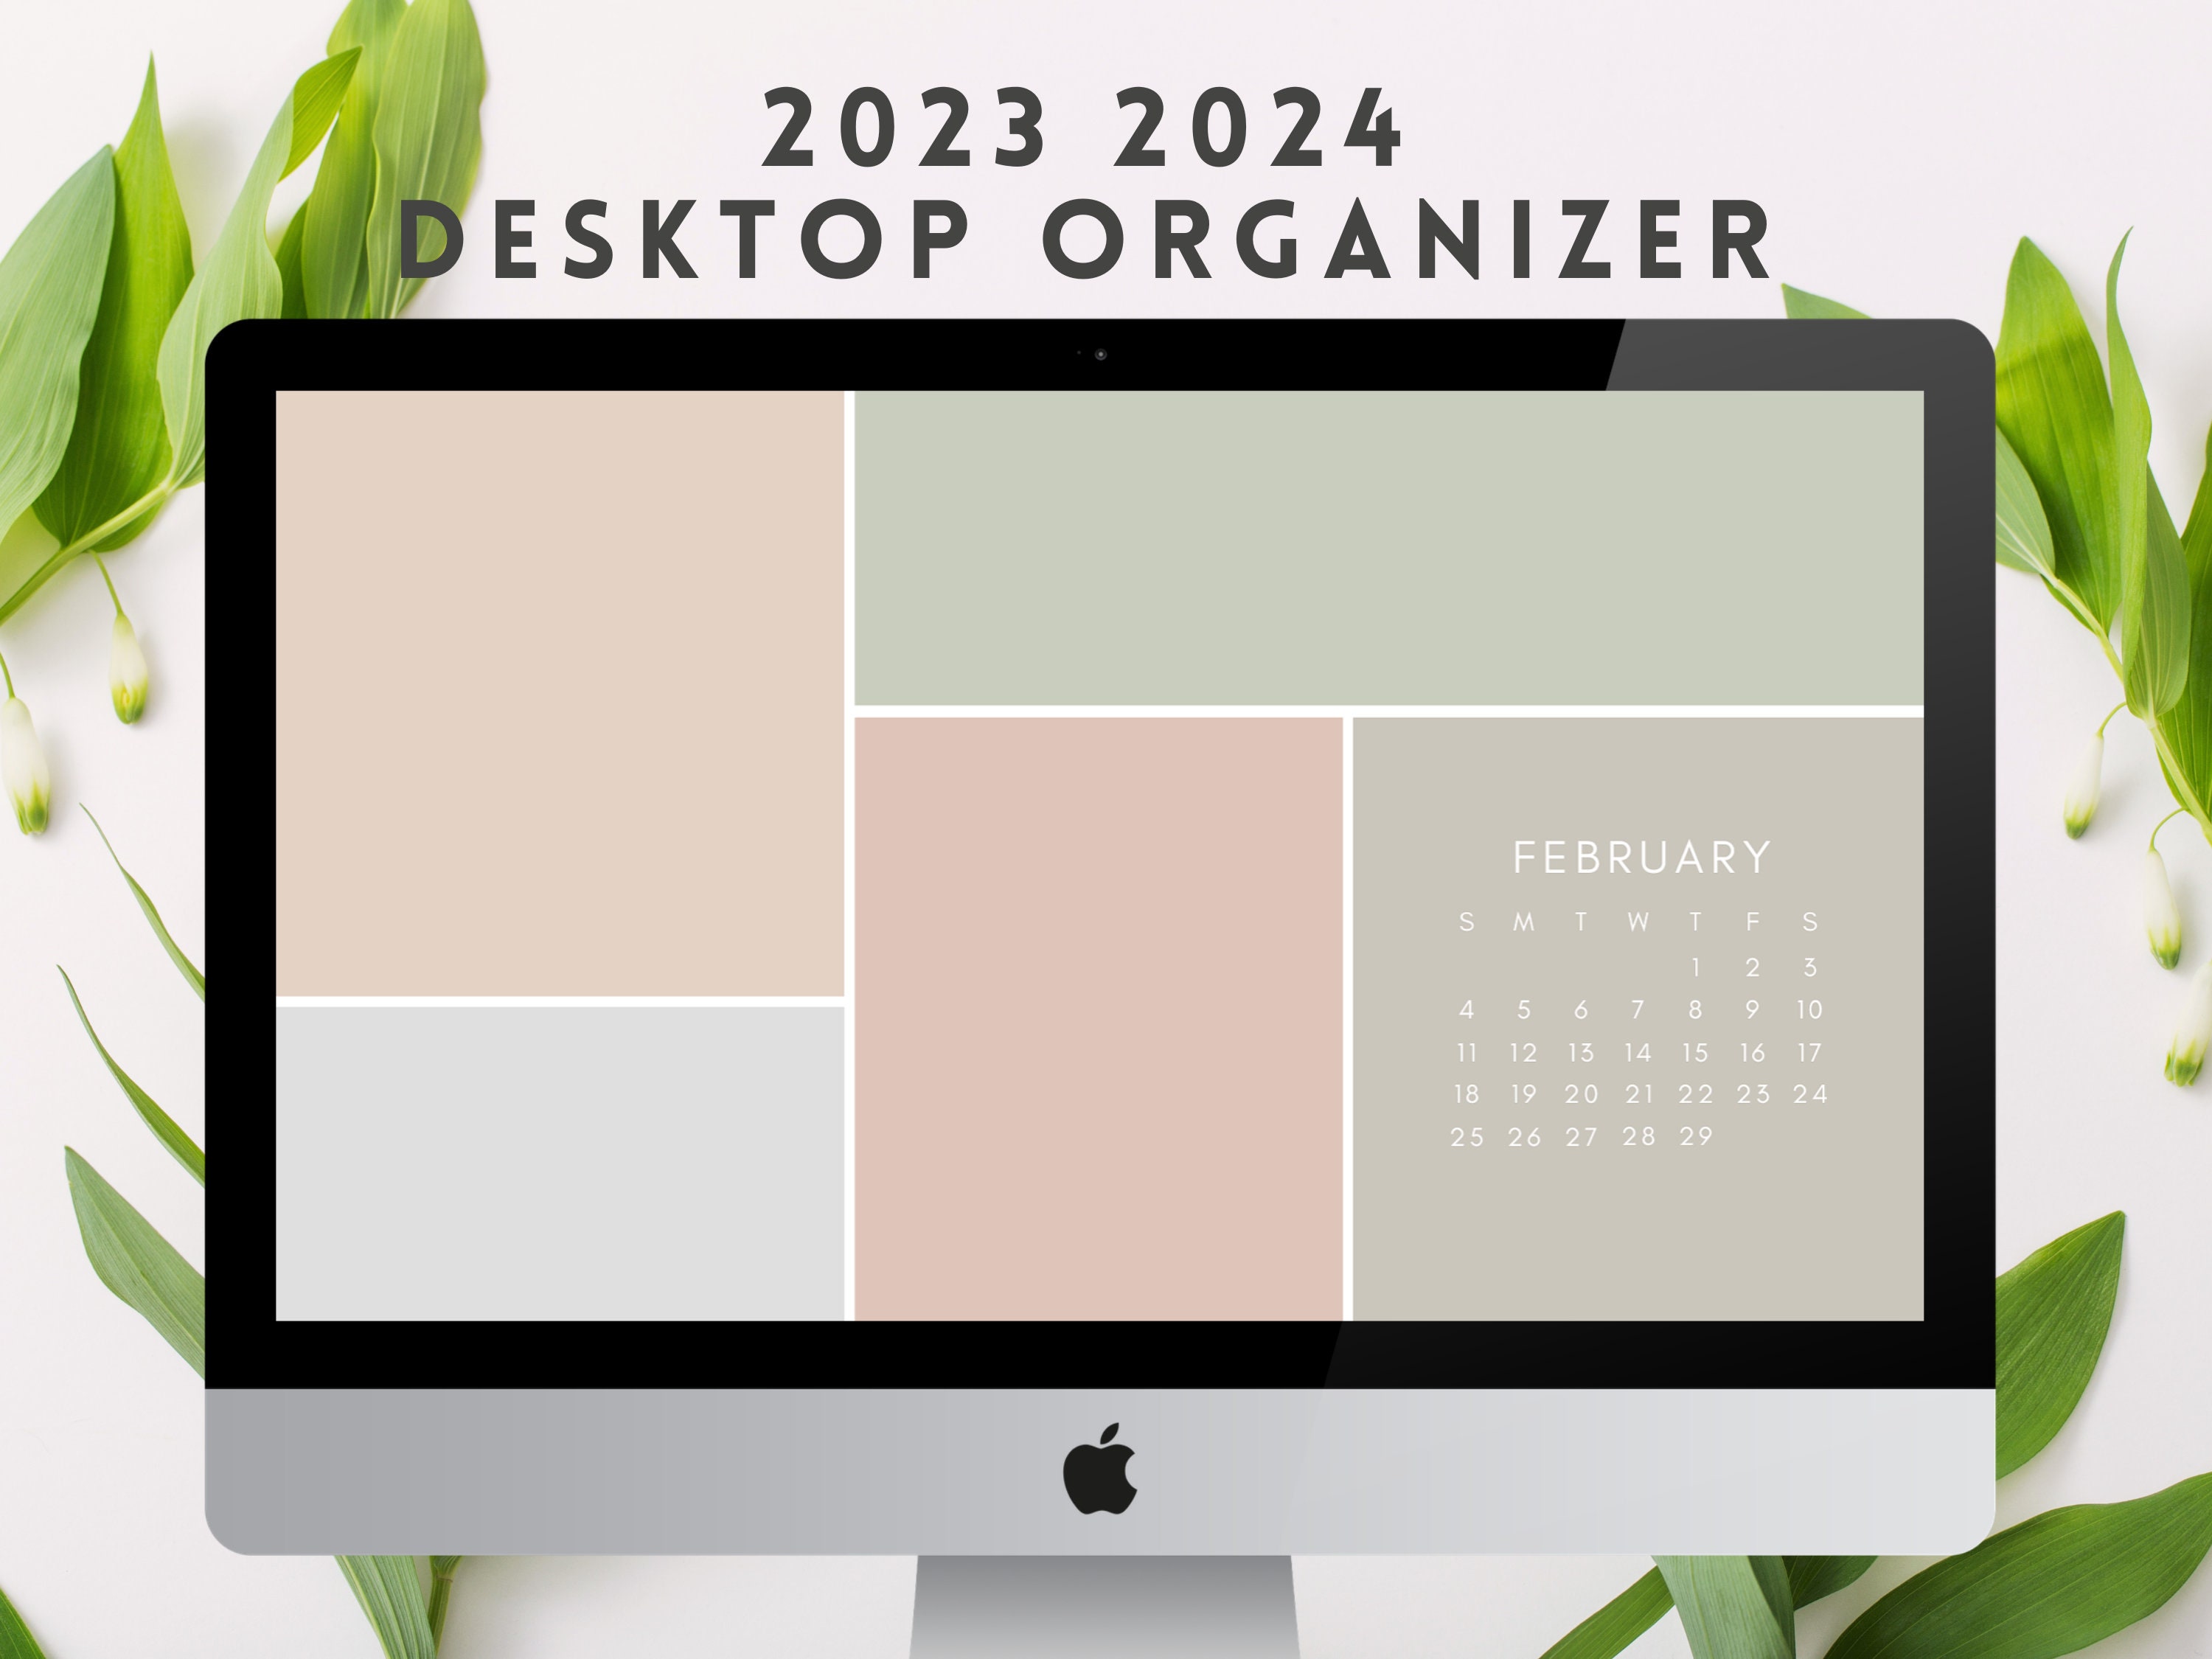 24 Free Laptop Wallpapers For Your Workspace In 2023 - Brit + Co